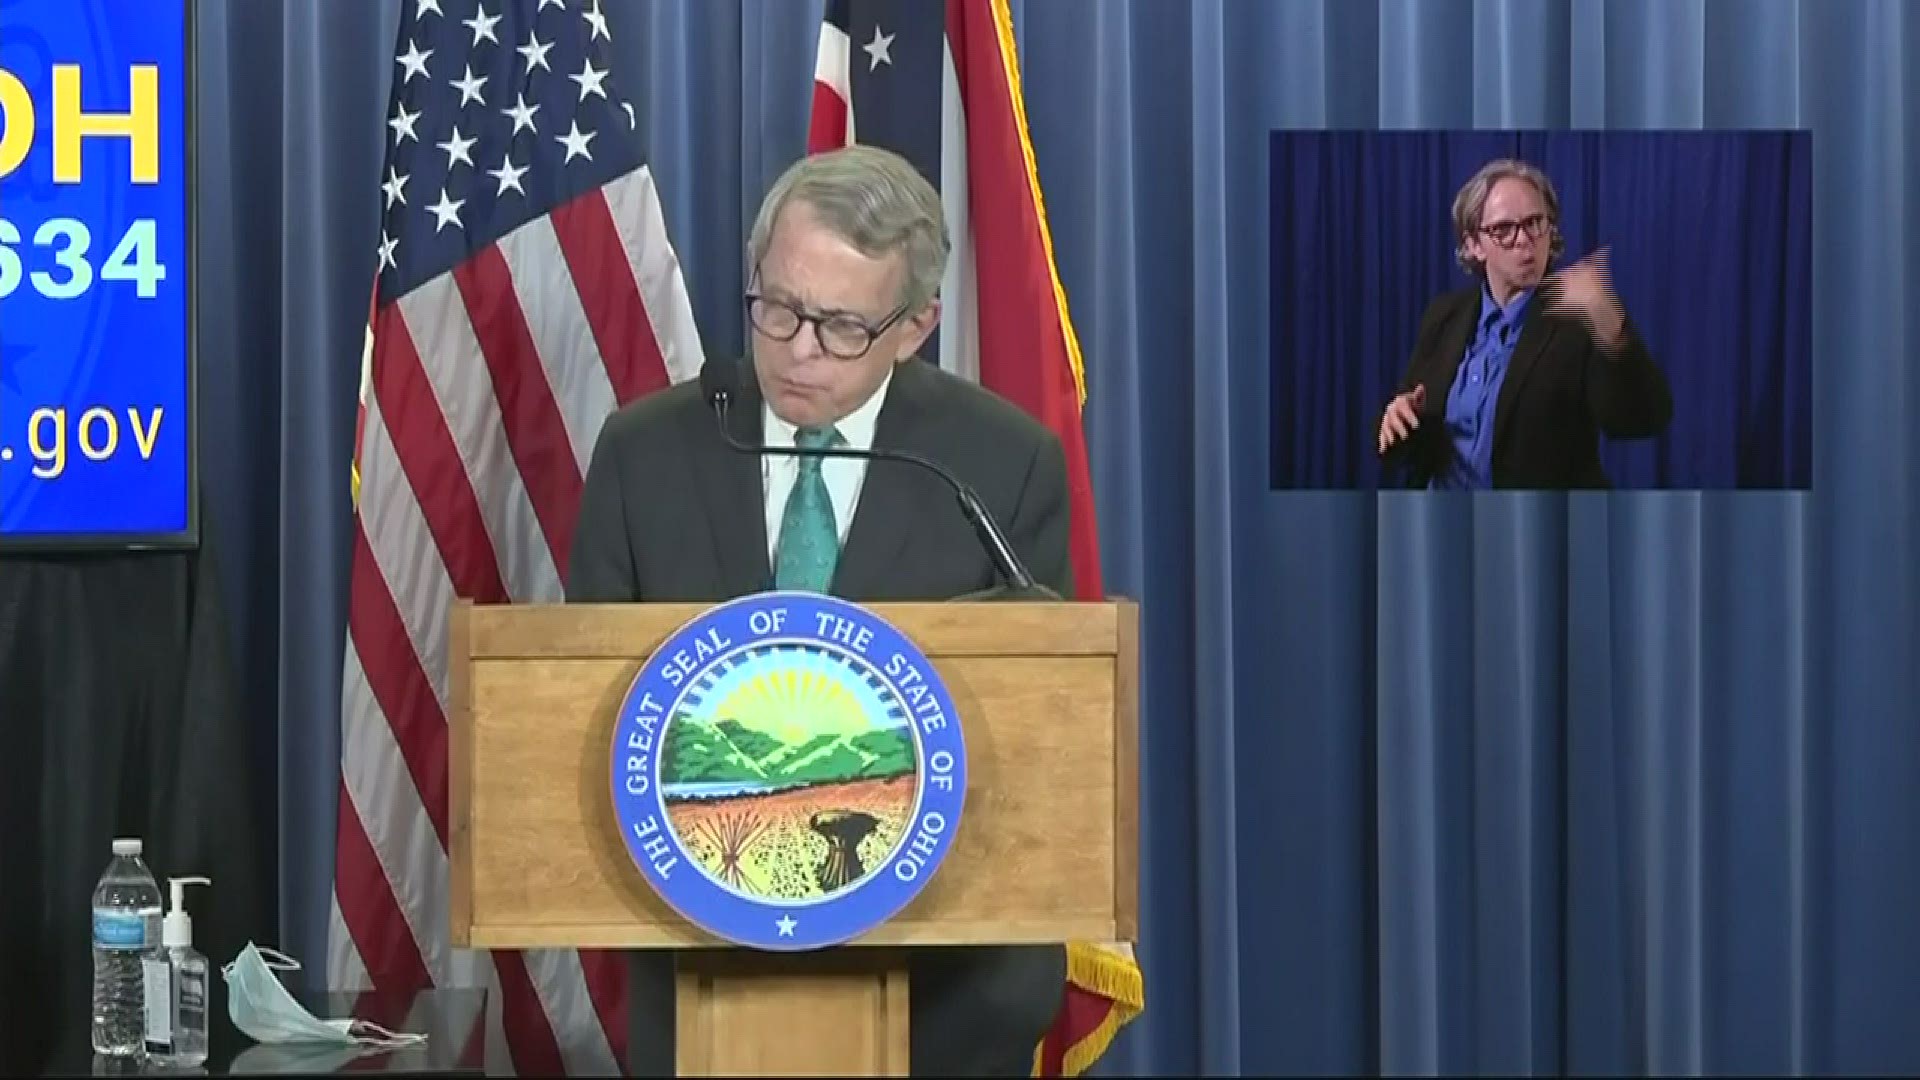 Gov. Mike DeWine announced that any Ohioan who wants a COVID-19 test can now receive a test even if they are low-risk or not showing symptoms.